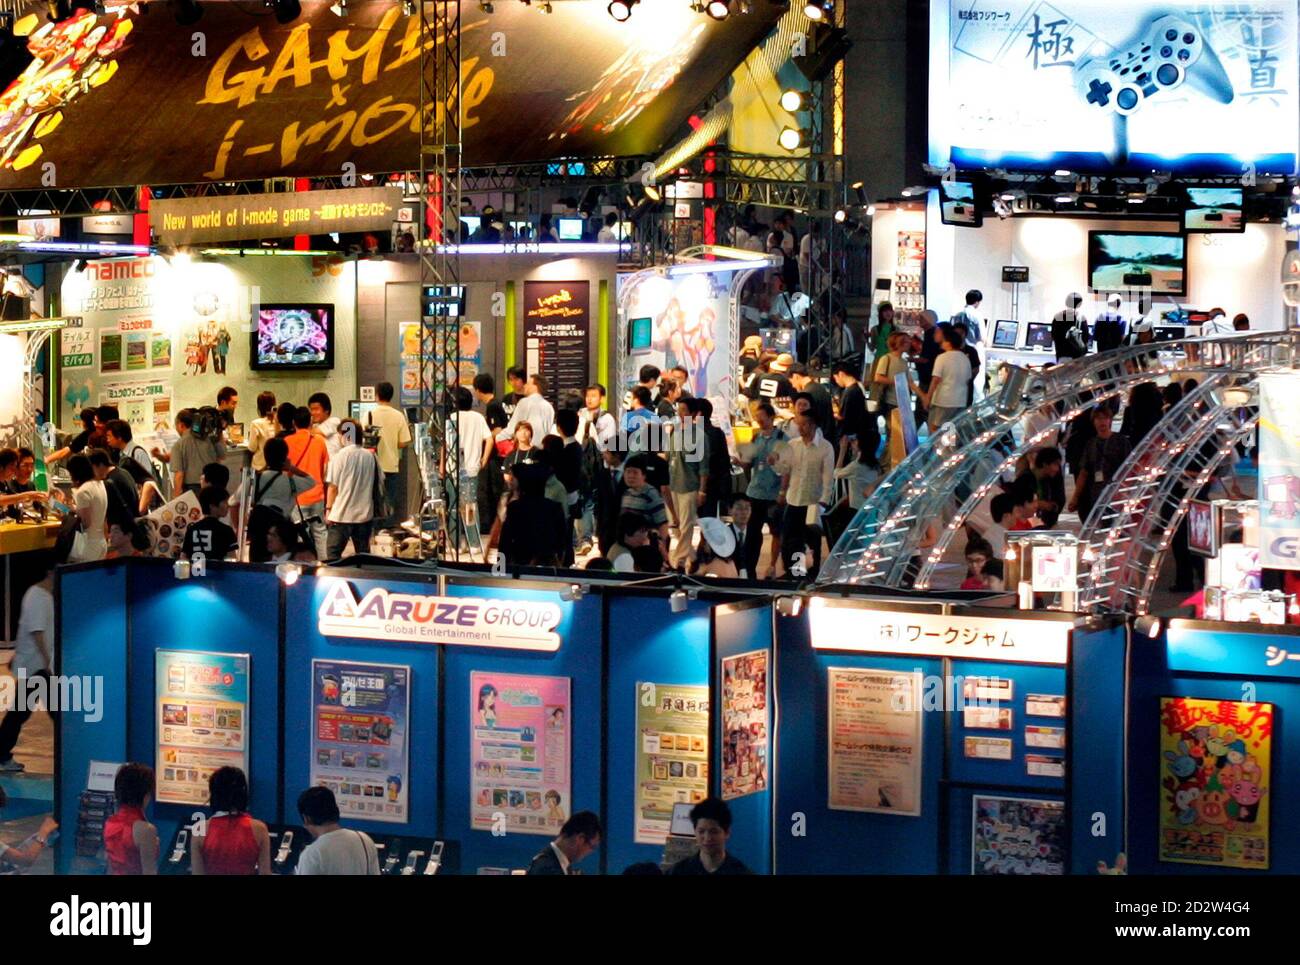 Visitors attend the Tokyo Game Show 2005, Japan's biggest video game software exhibition, at the Makuhari Messe Convention Centre in Chiba, east of Tokyo September 16, 2005. About 130 companies from 11 countries are participating in the three-day show. REUTERS/Toru Hanai  TH/KS Stock Photo